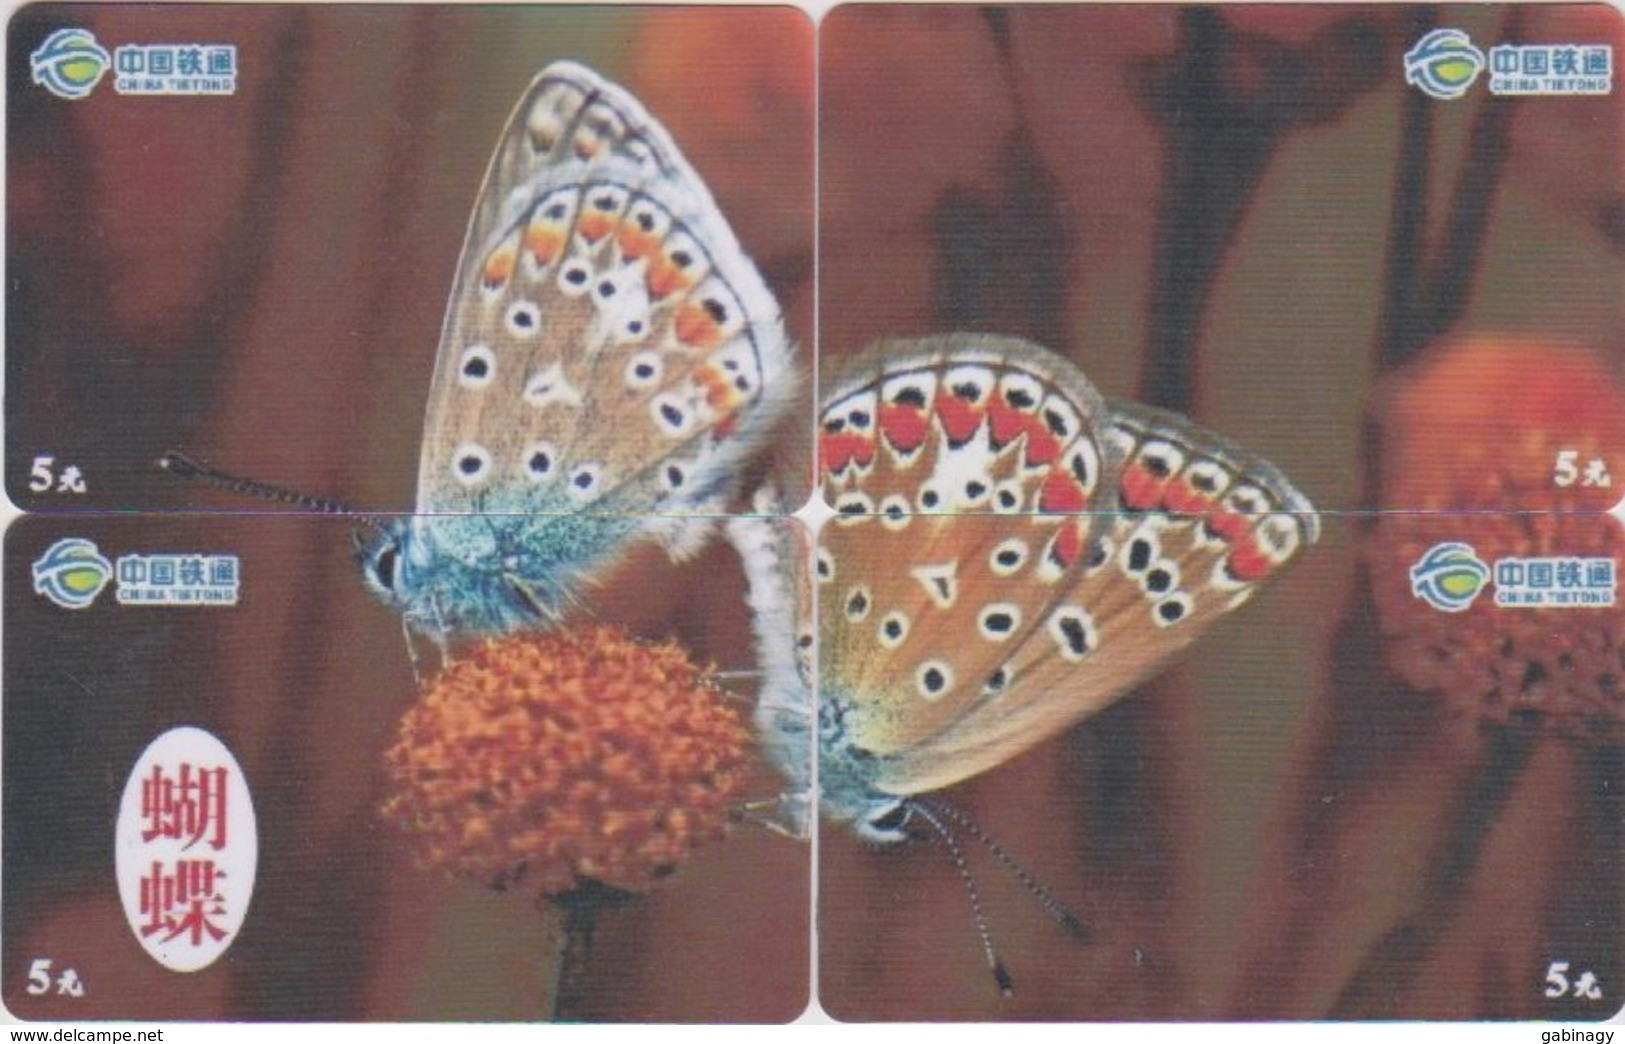 CHINA - BUTTERFLY-09 - SET OF 4 CARDS - Cina